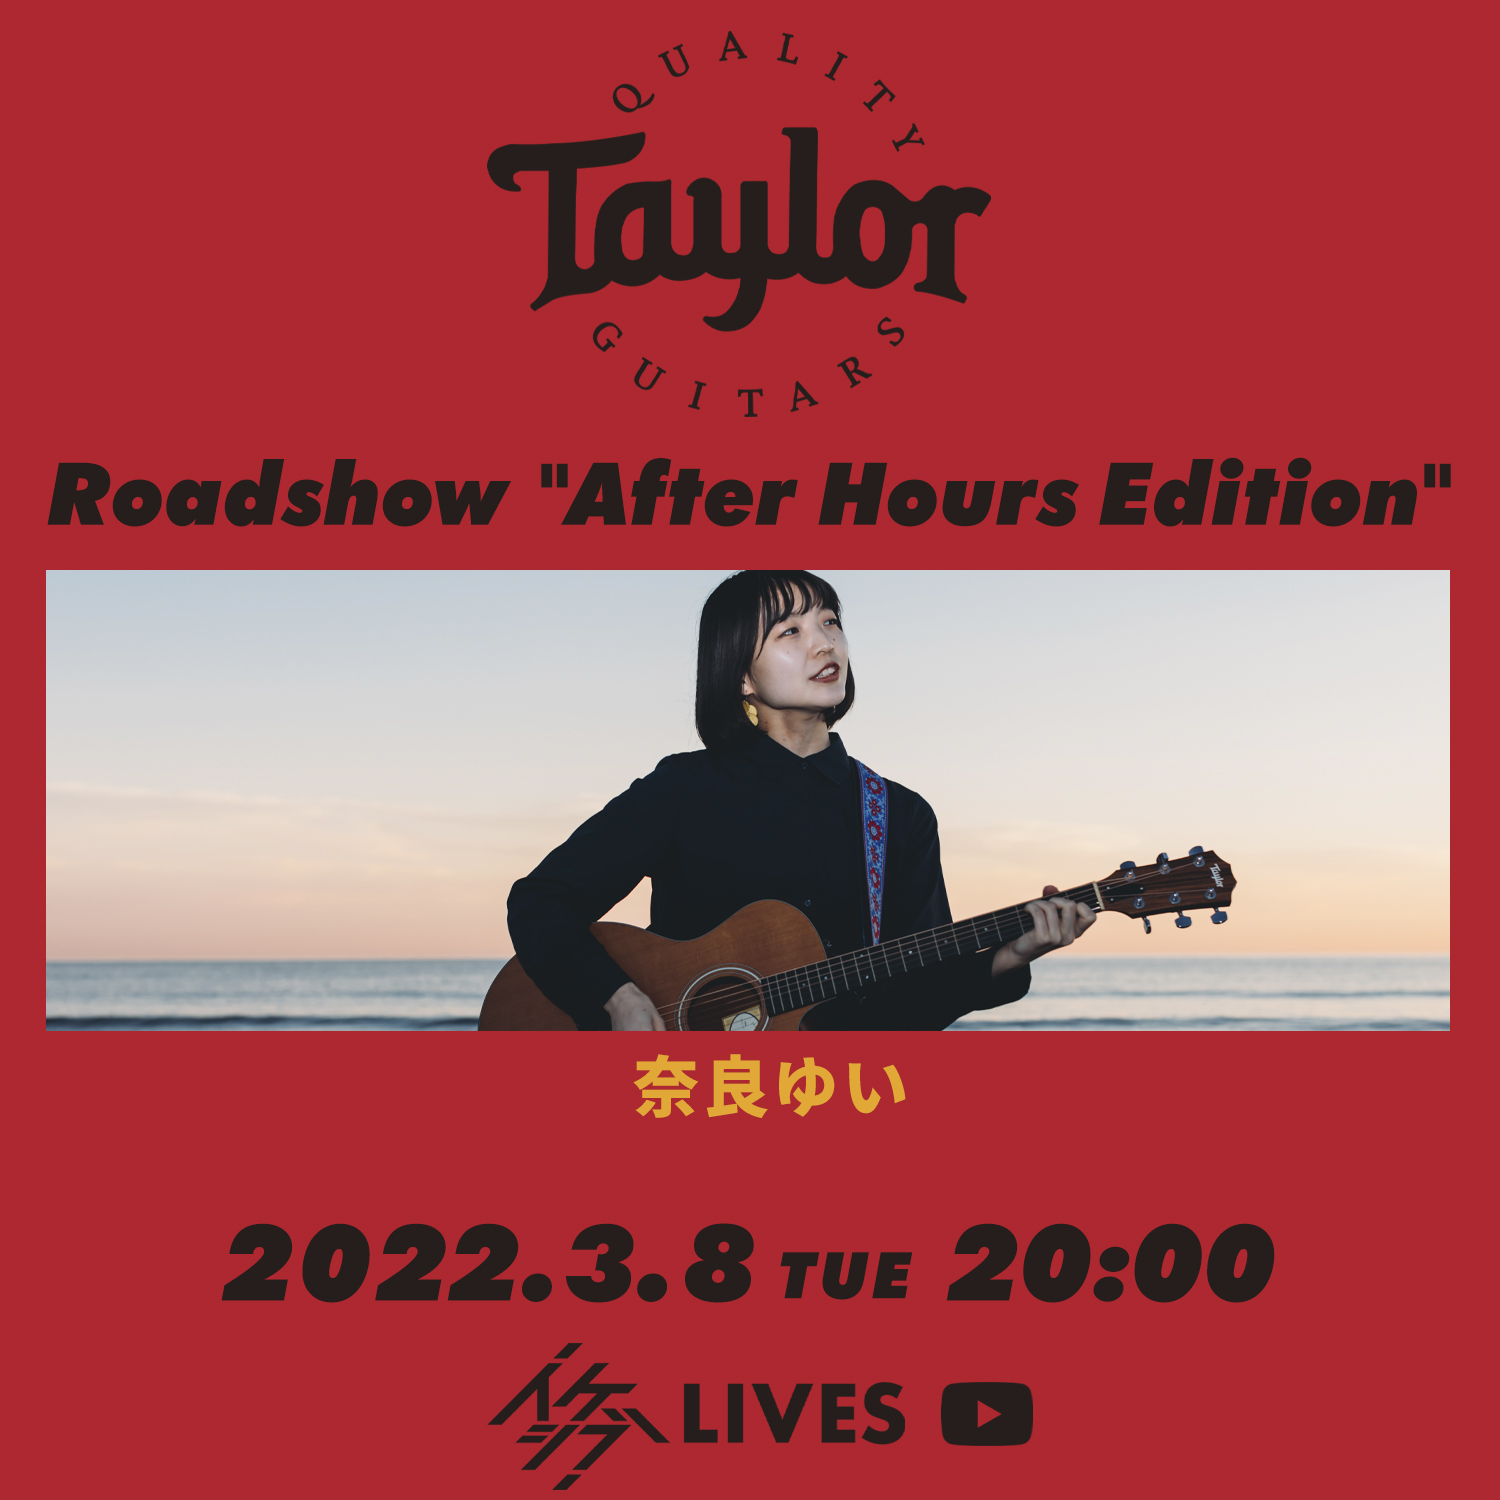 Taylor Roadshow “After Hours Edition” from イケシブLIVES